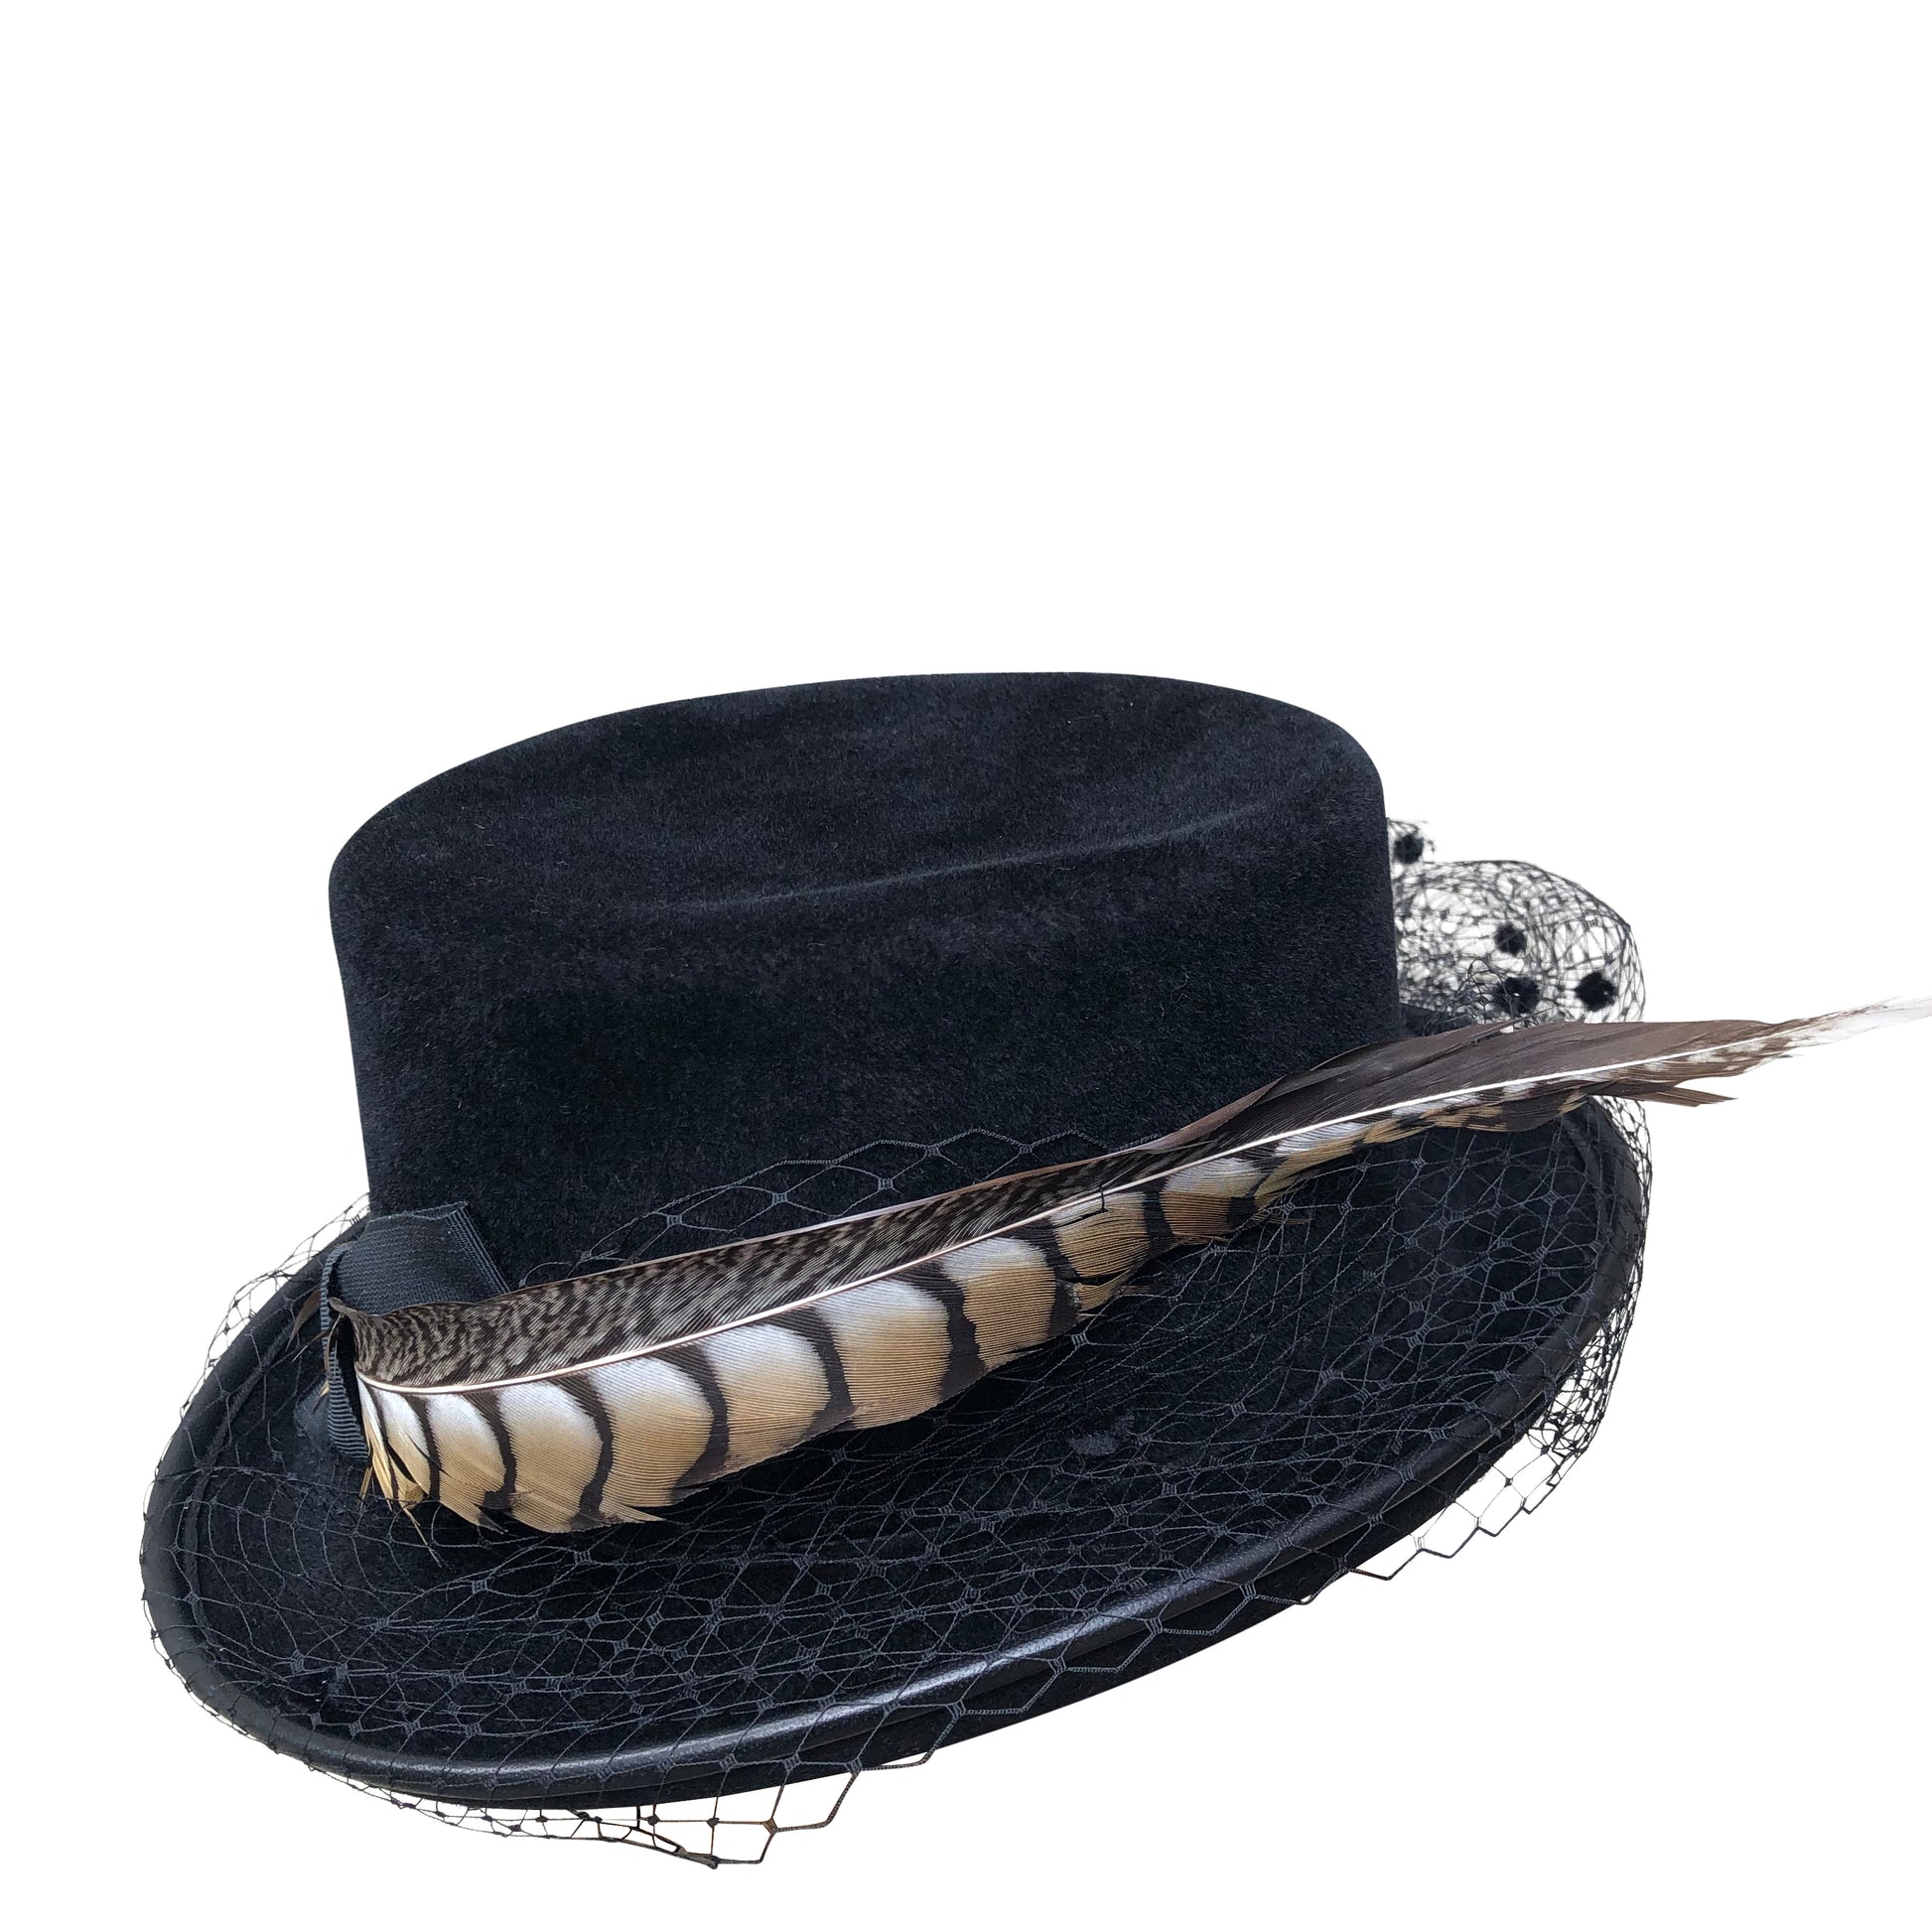 Black Victorian Style Top Hat from Cha Cha's House of Ill Repute